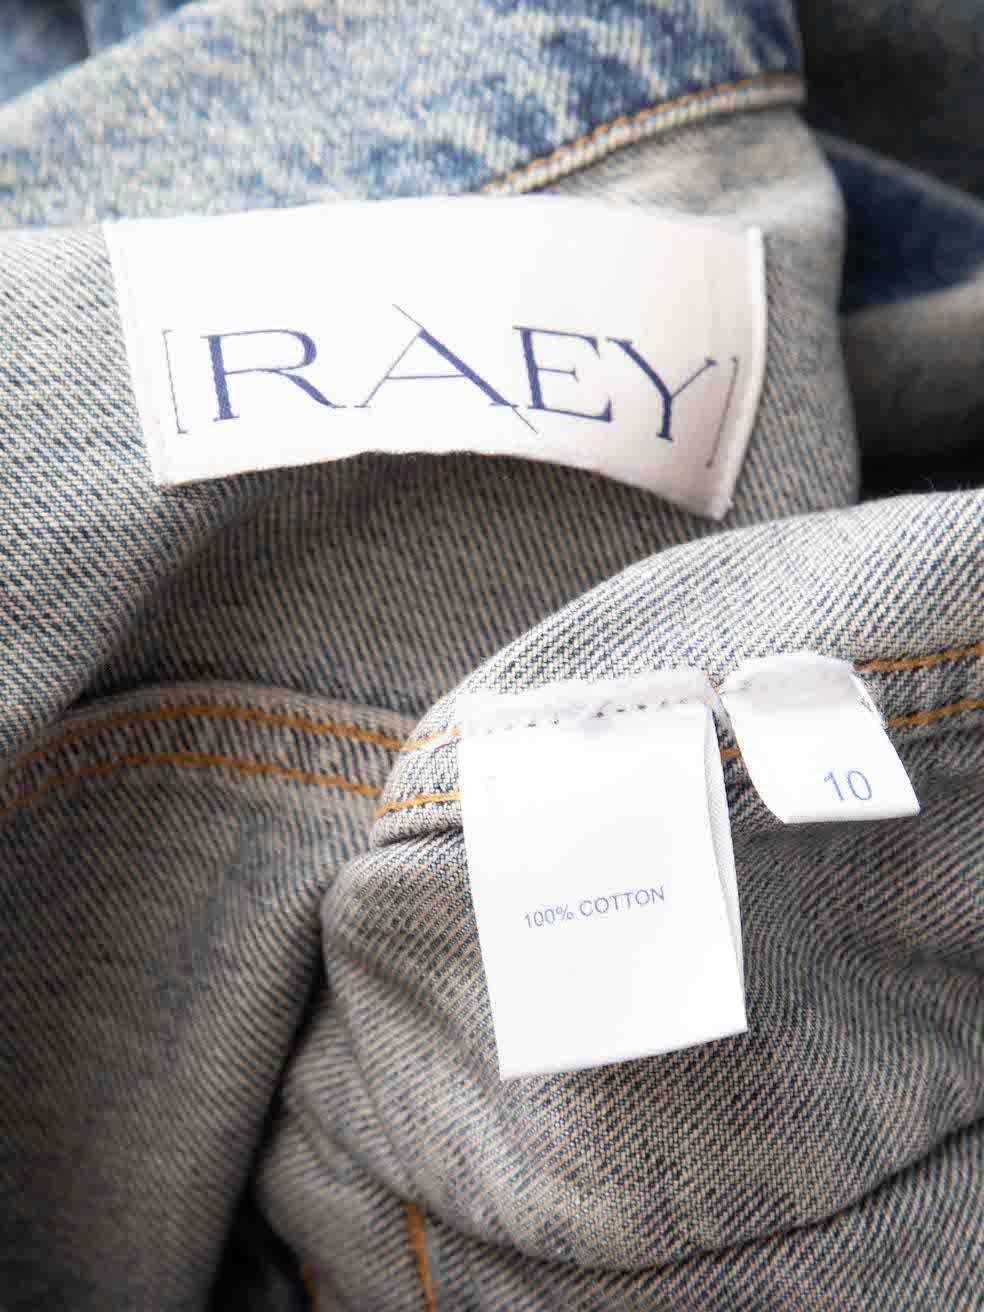 Raey Blue Washed Denim Jacket Size M In Excellent Condition For Sale In London, GB